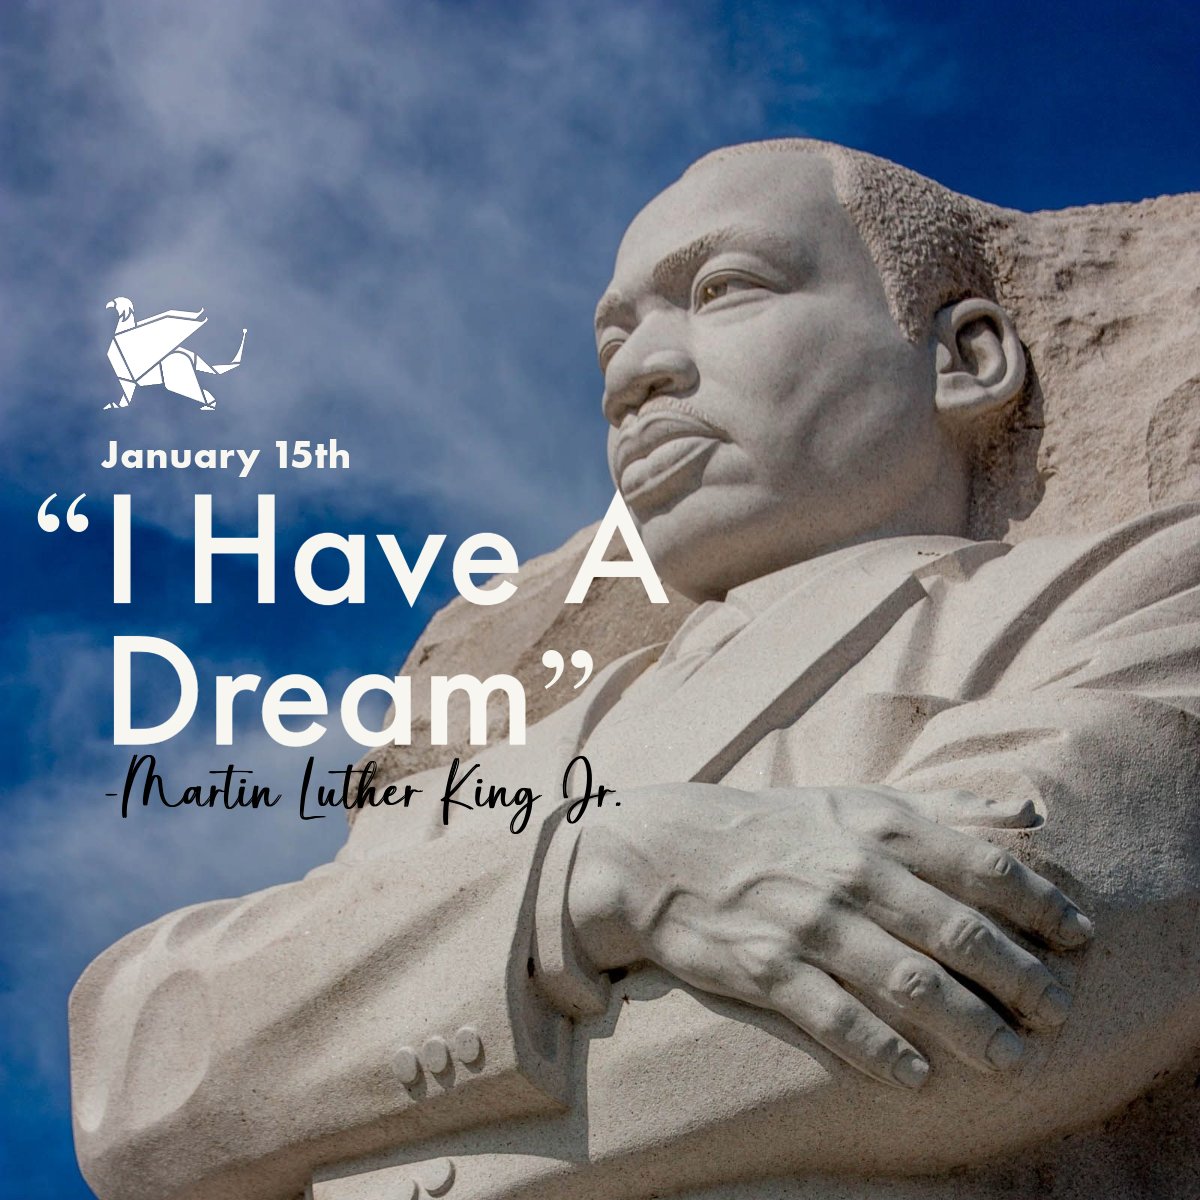 📢 In honor of Martin Luther King Jr. Day, Griffiss Institute offices will be closed today, January 15th. 🕊️ Did you know? MLK was the youngest recipient of the Nobel Peace Prize in 1964 at age 35. #MLKDay #GriffissInstitute